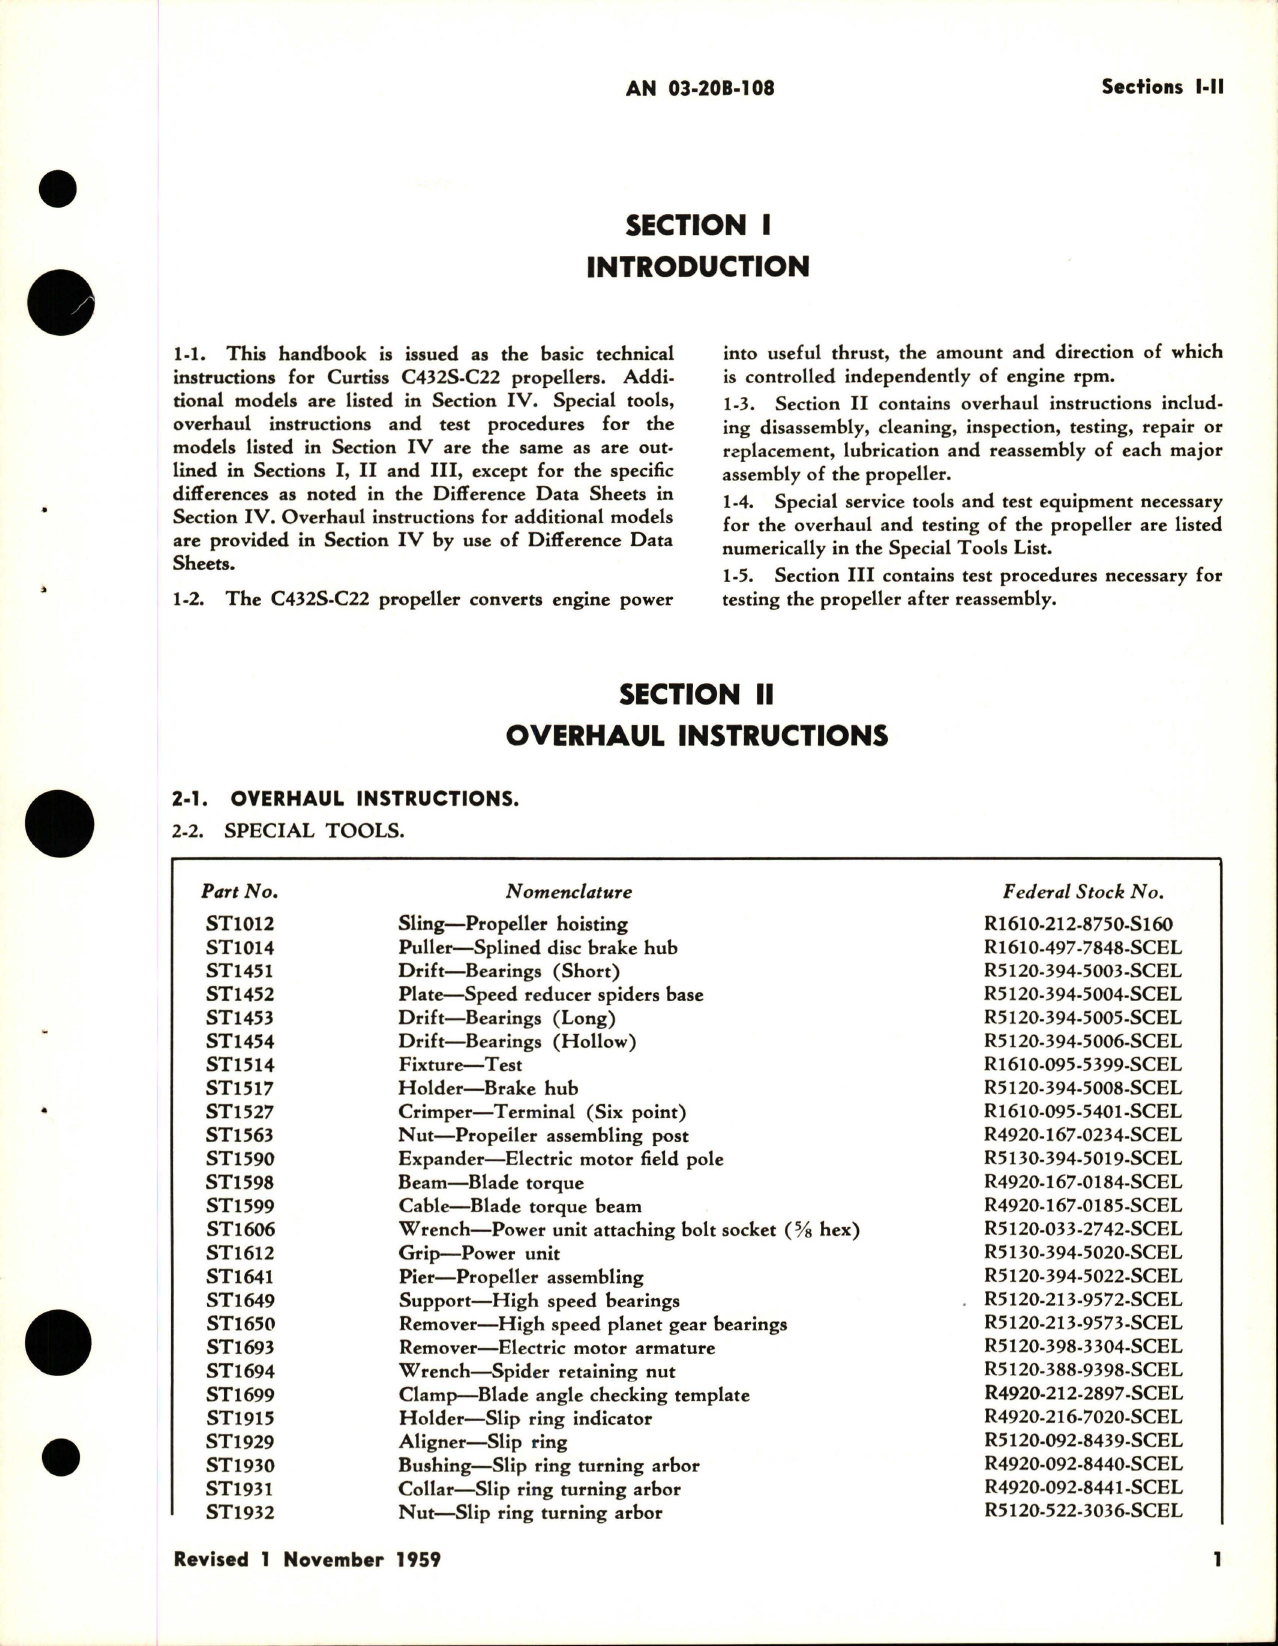 Sample page 7 from AirCorps Library document: Overhaul Instructions for Pitch Lever Type Electric Propeller - Models C432S-C22, C432S-C24, and C432S-C26